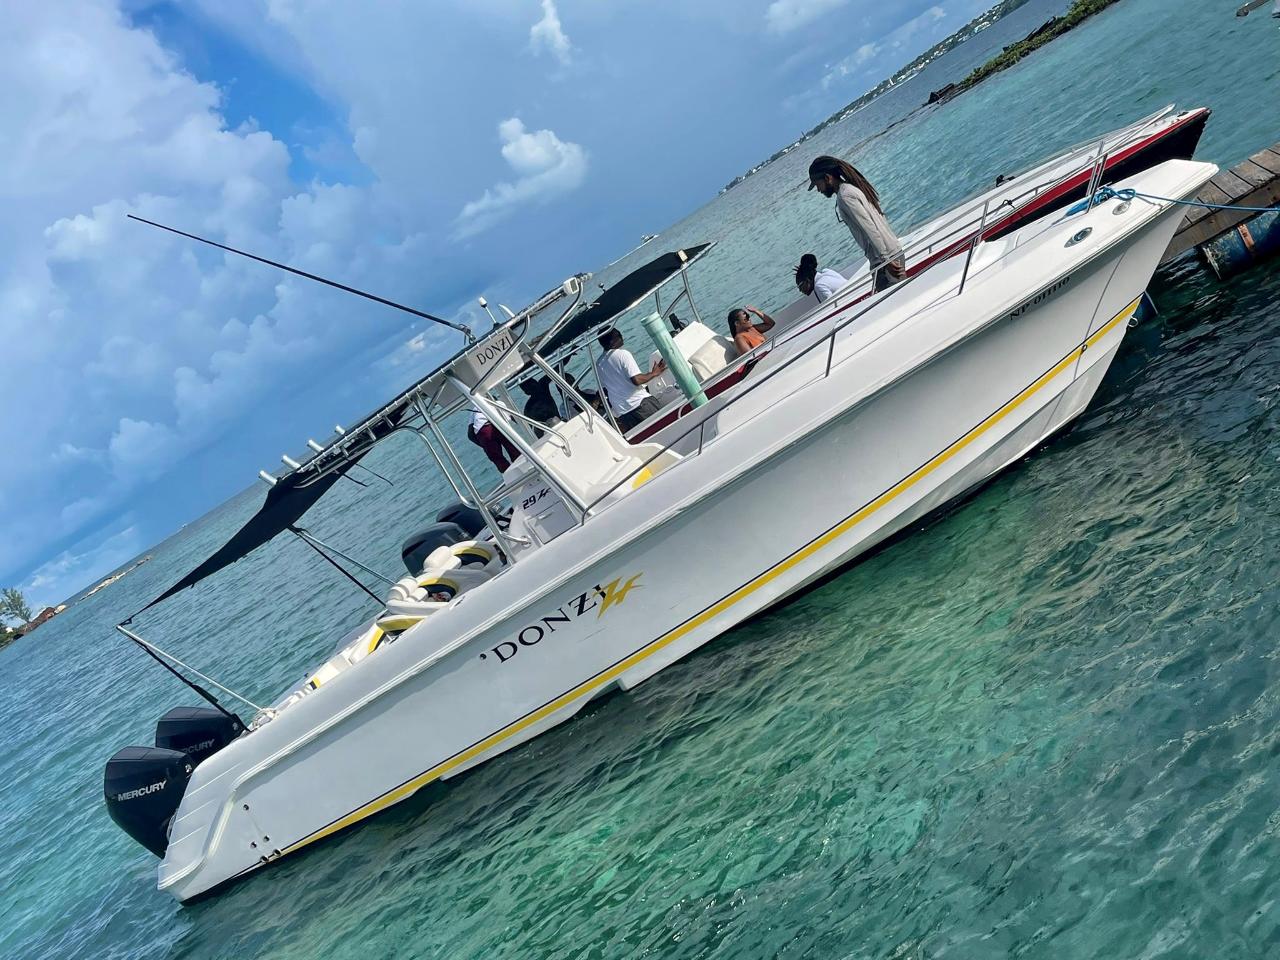 29 FOOT DONZI ZX BOAT HIRE - FROM NASSAU TO ROSE ISLAND  